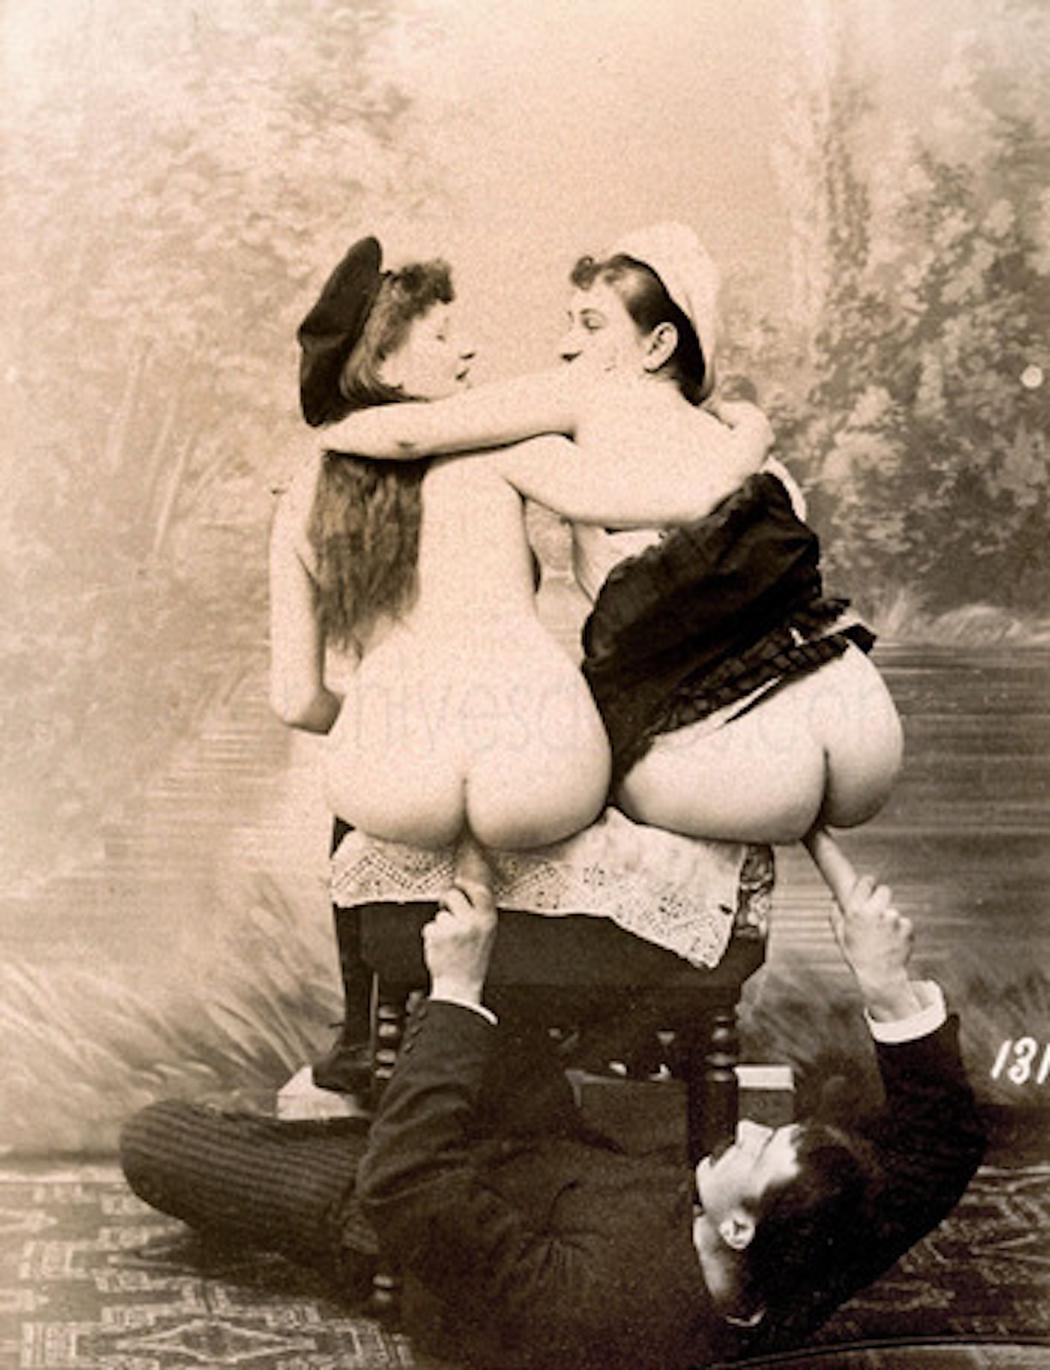 Porn in 1800s